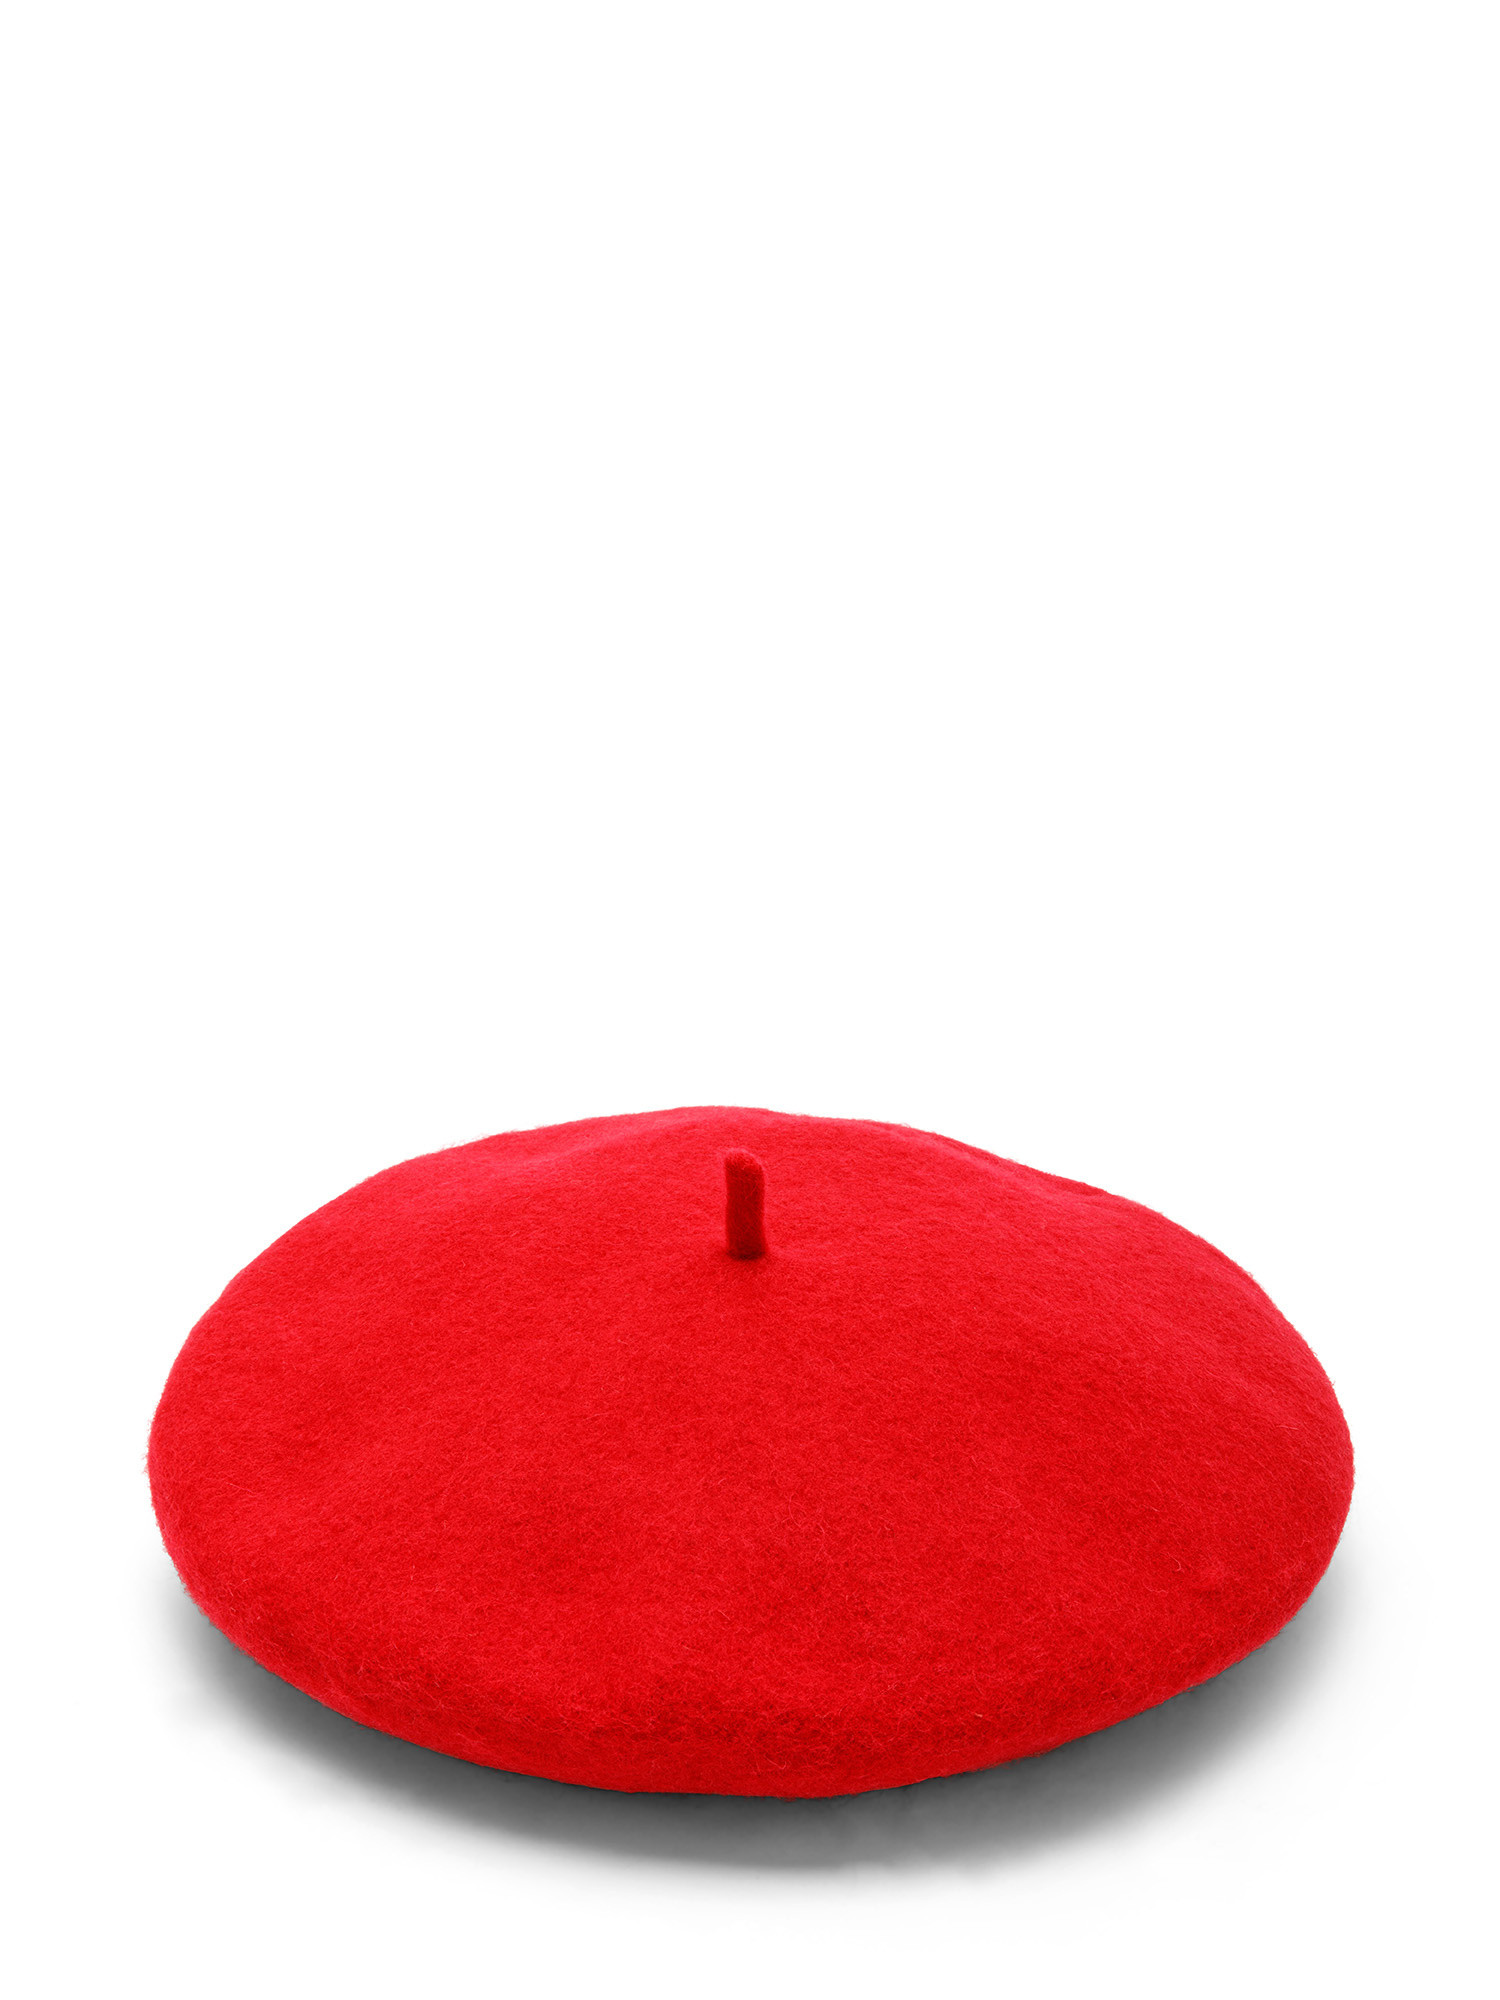 Koan - Pure wool beret, Red, large image number 0